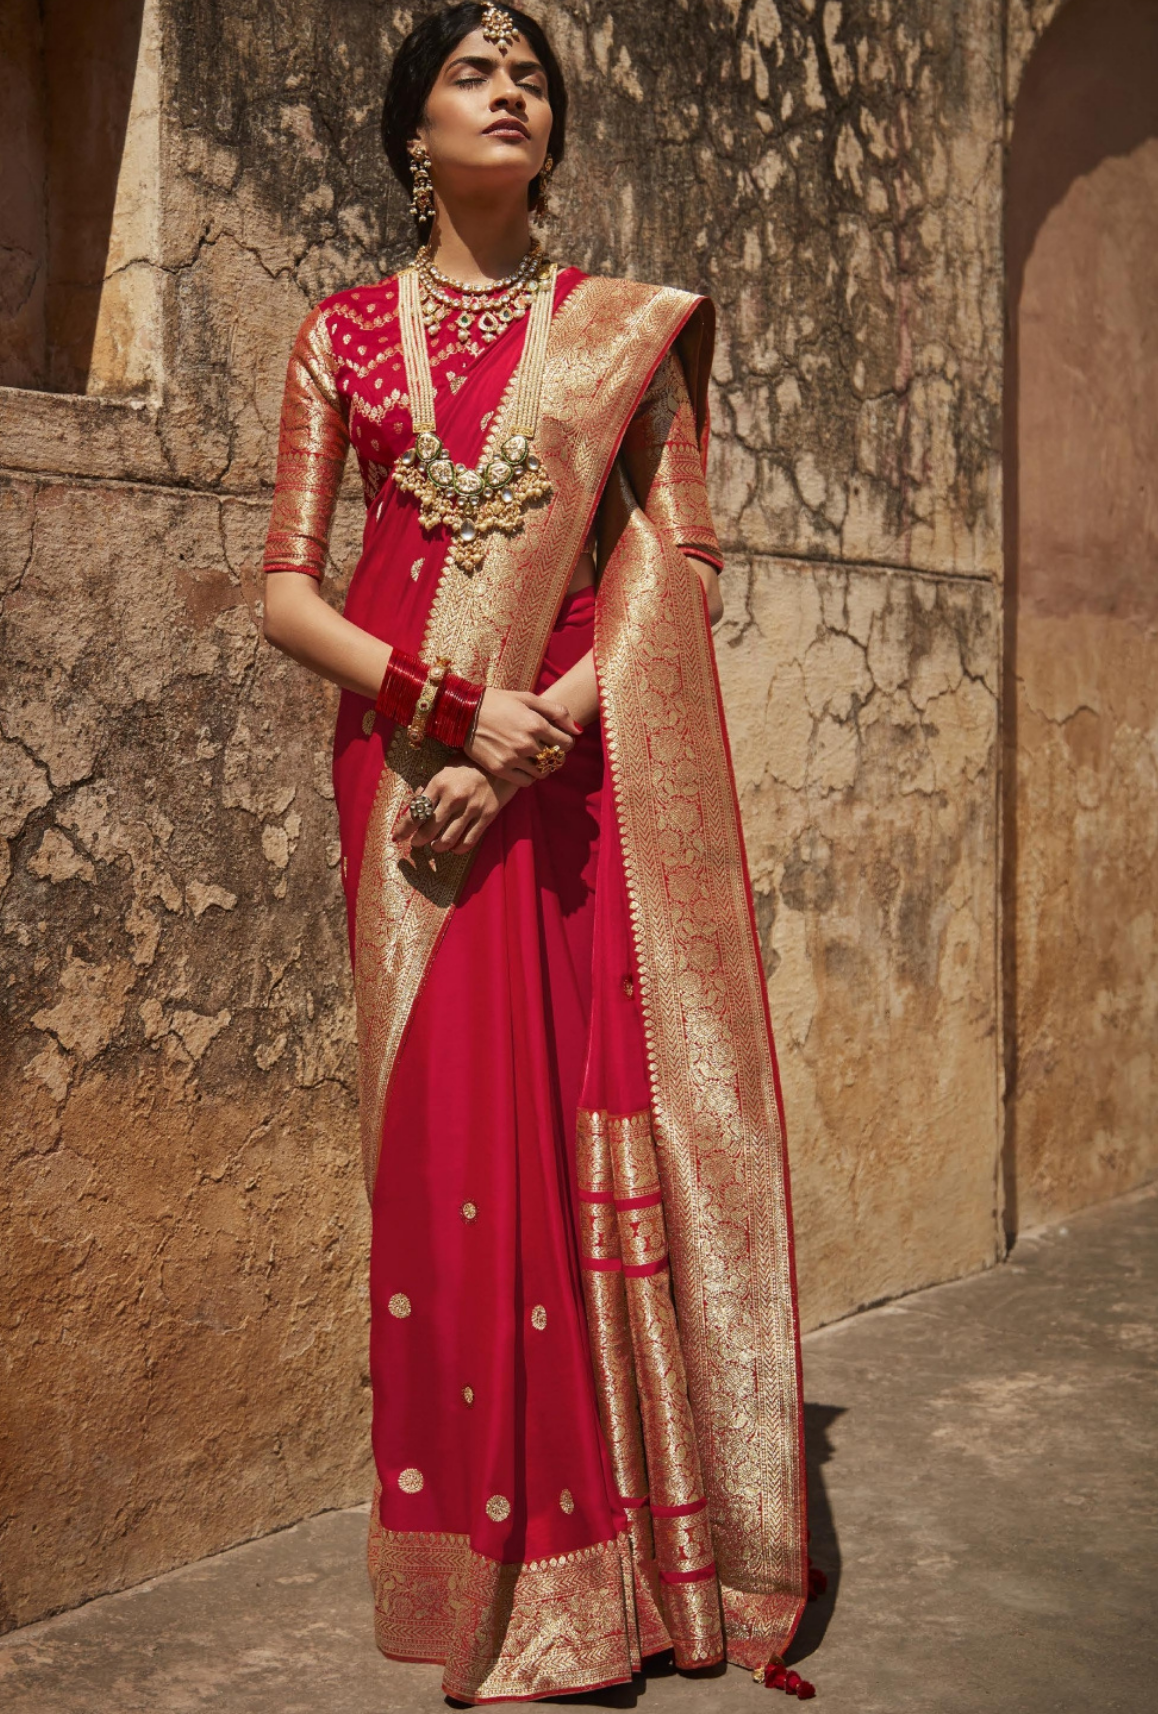 Redefine Elegance with Stunning Red Sarees